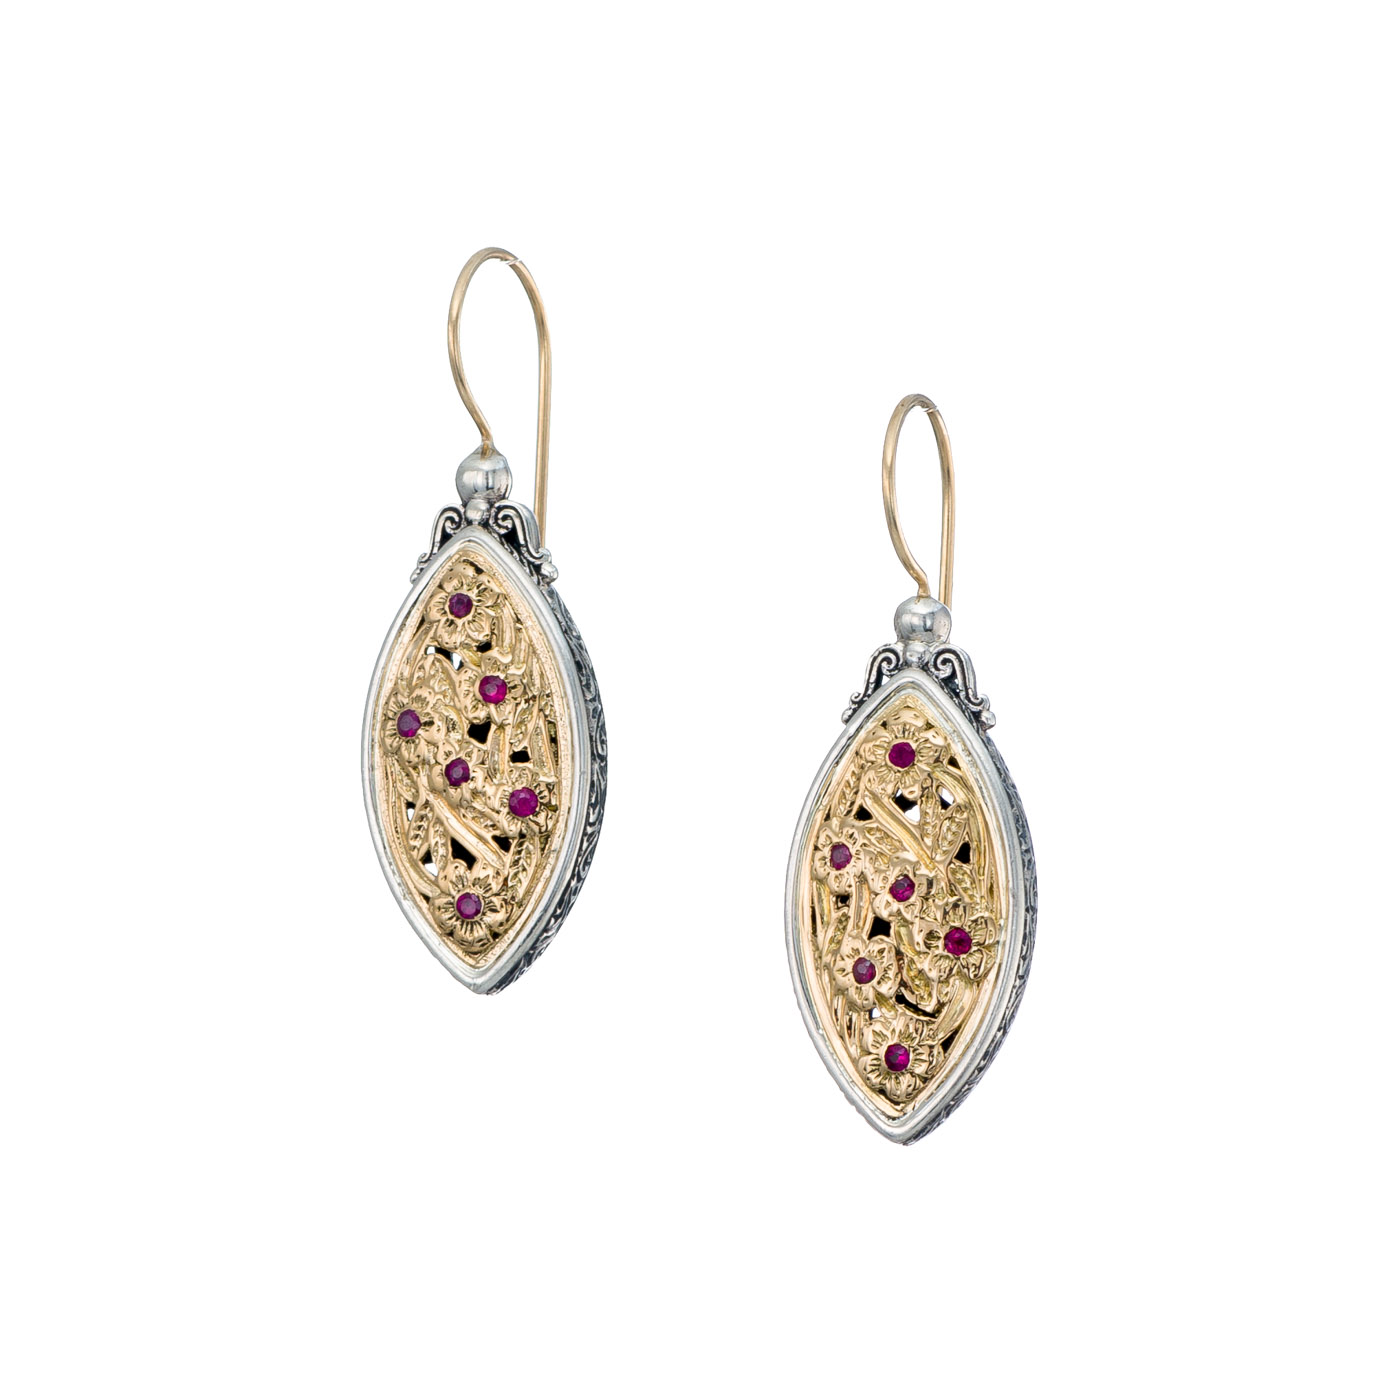 Harmony Earrings in 18K Gold and Sterling silver with rubies